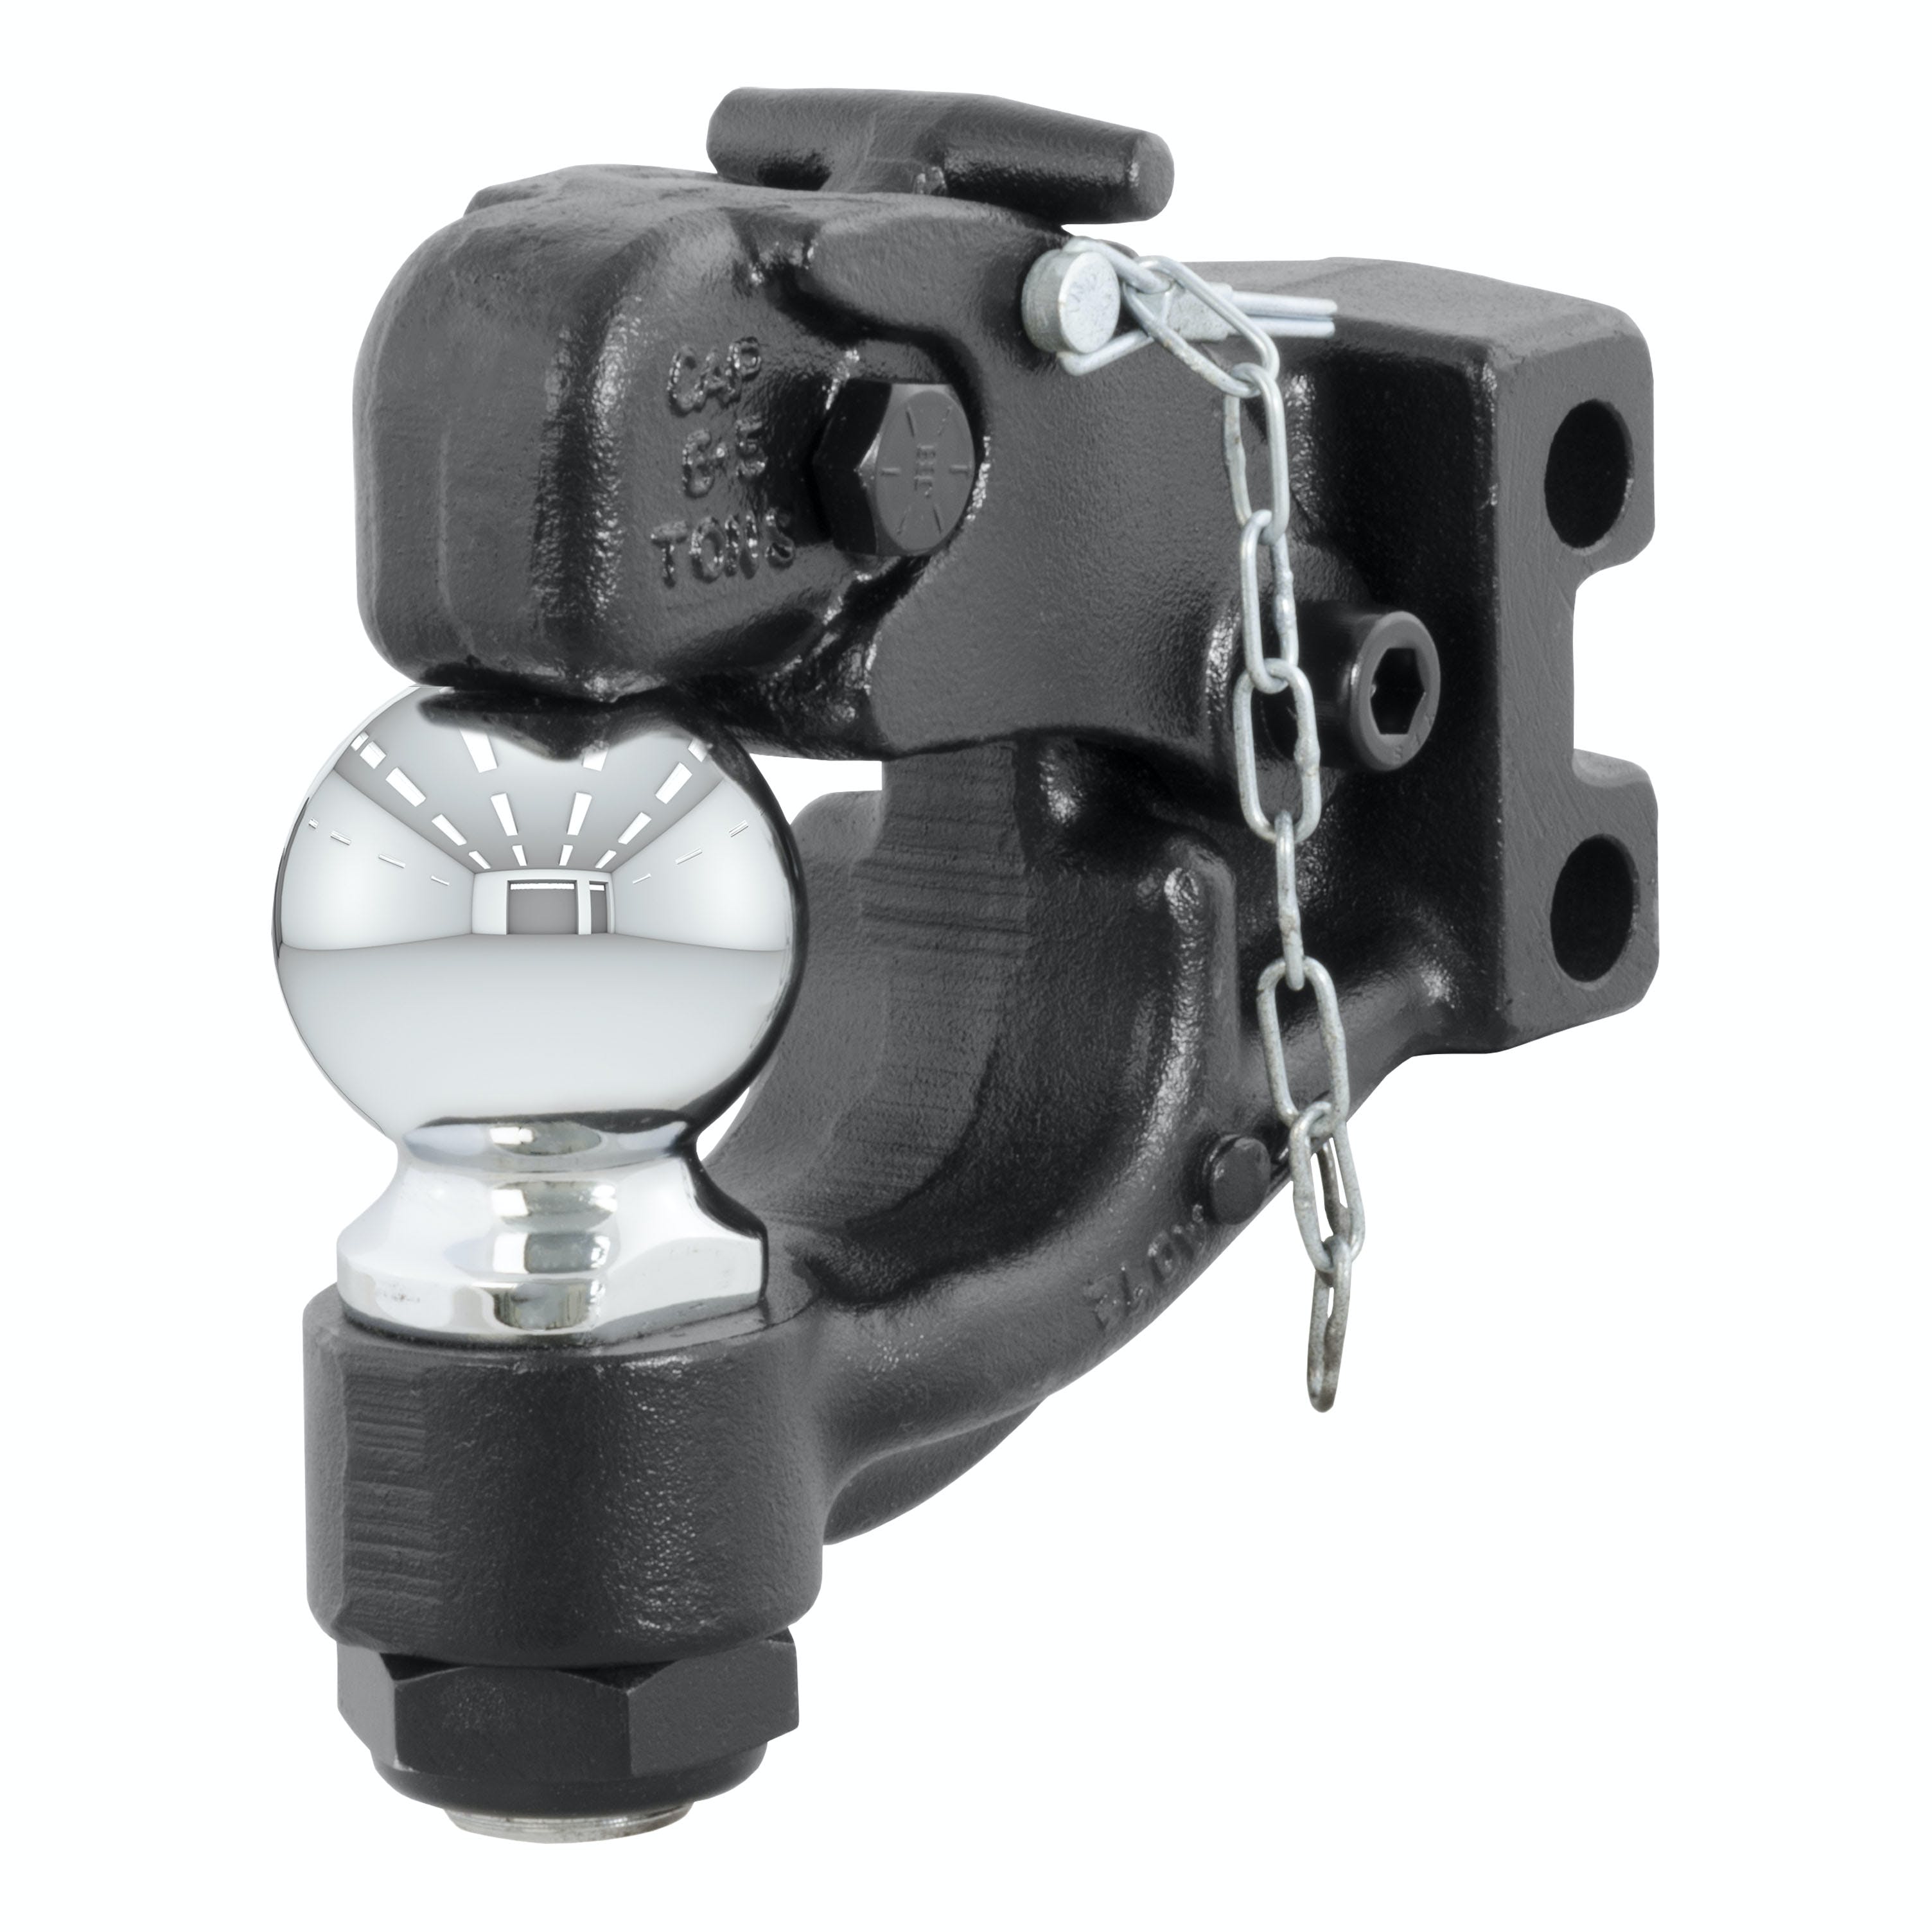 CURT 45920 Replacement Channel Mount Ball and Pintle Hitch (2-5/16 Ball, 13,000 lbs.)